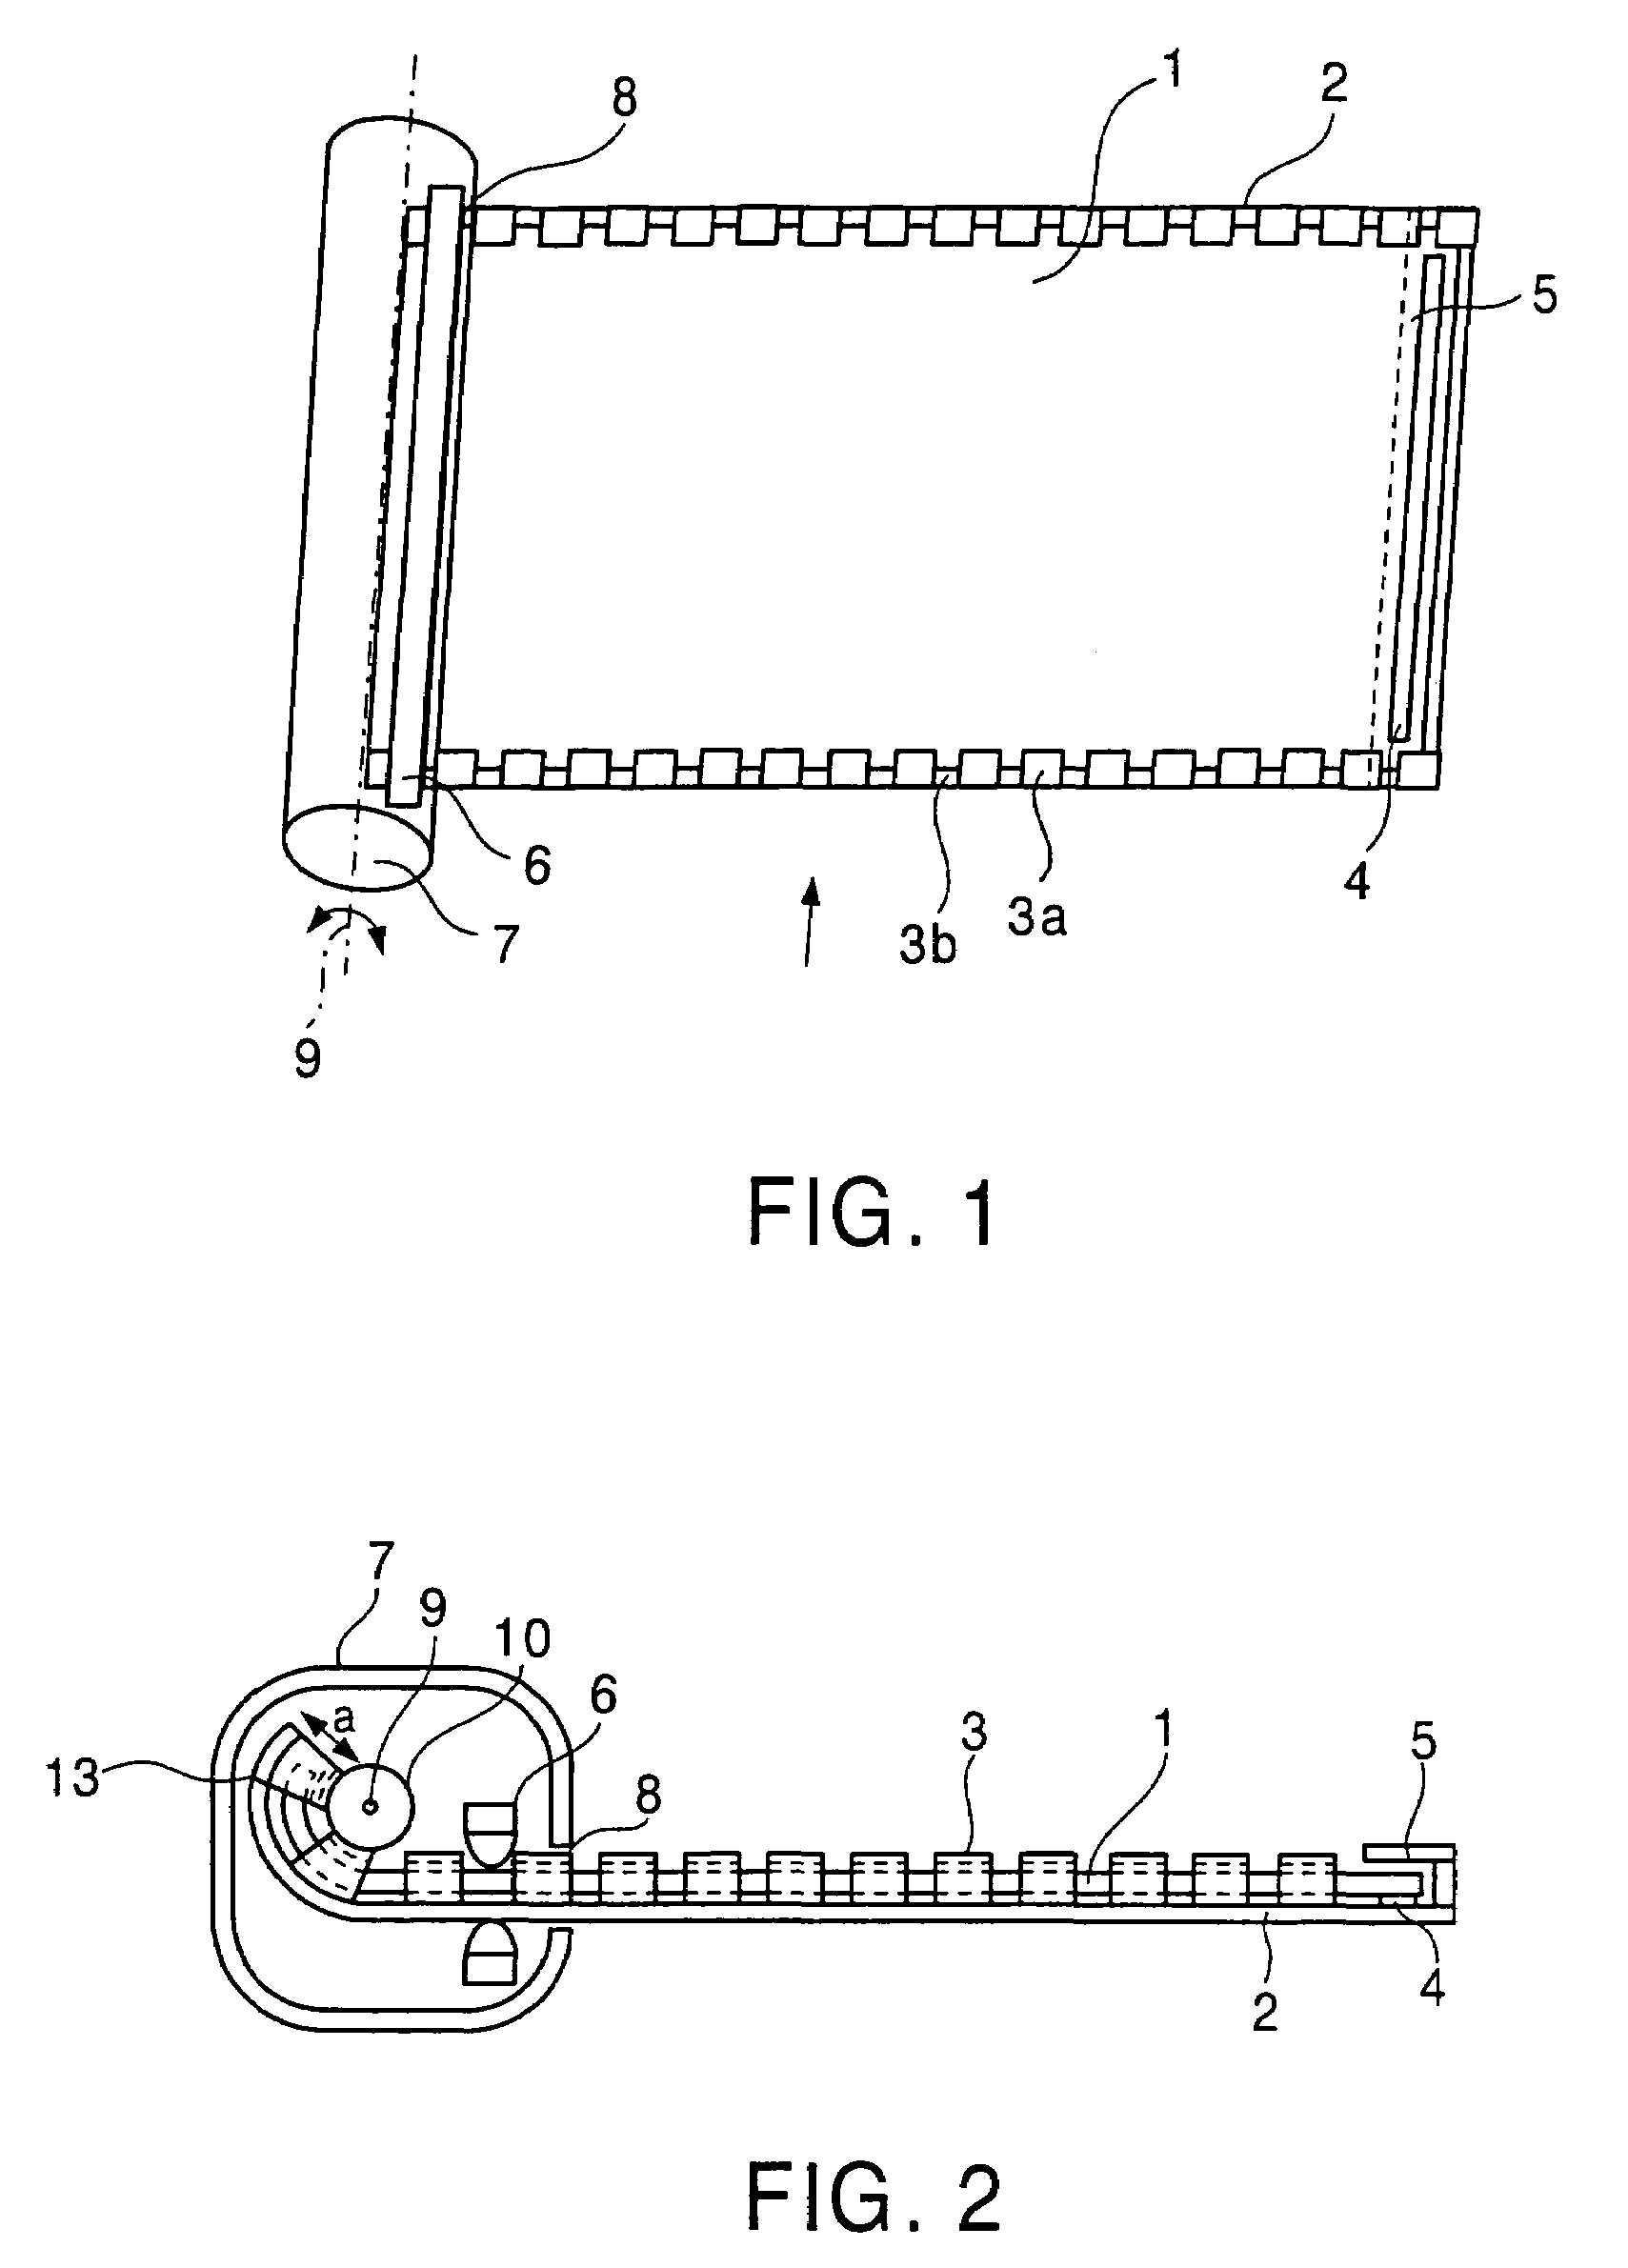 Display device having flexibility and a winding axis that winds the two slidable plates